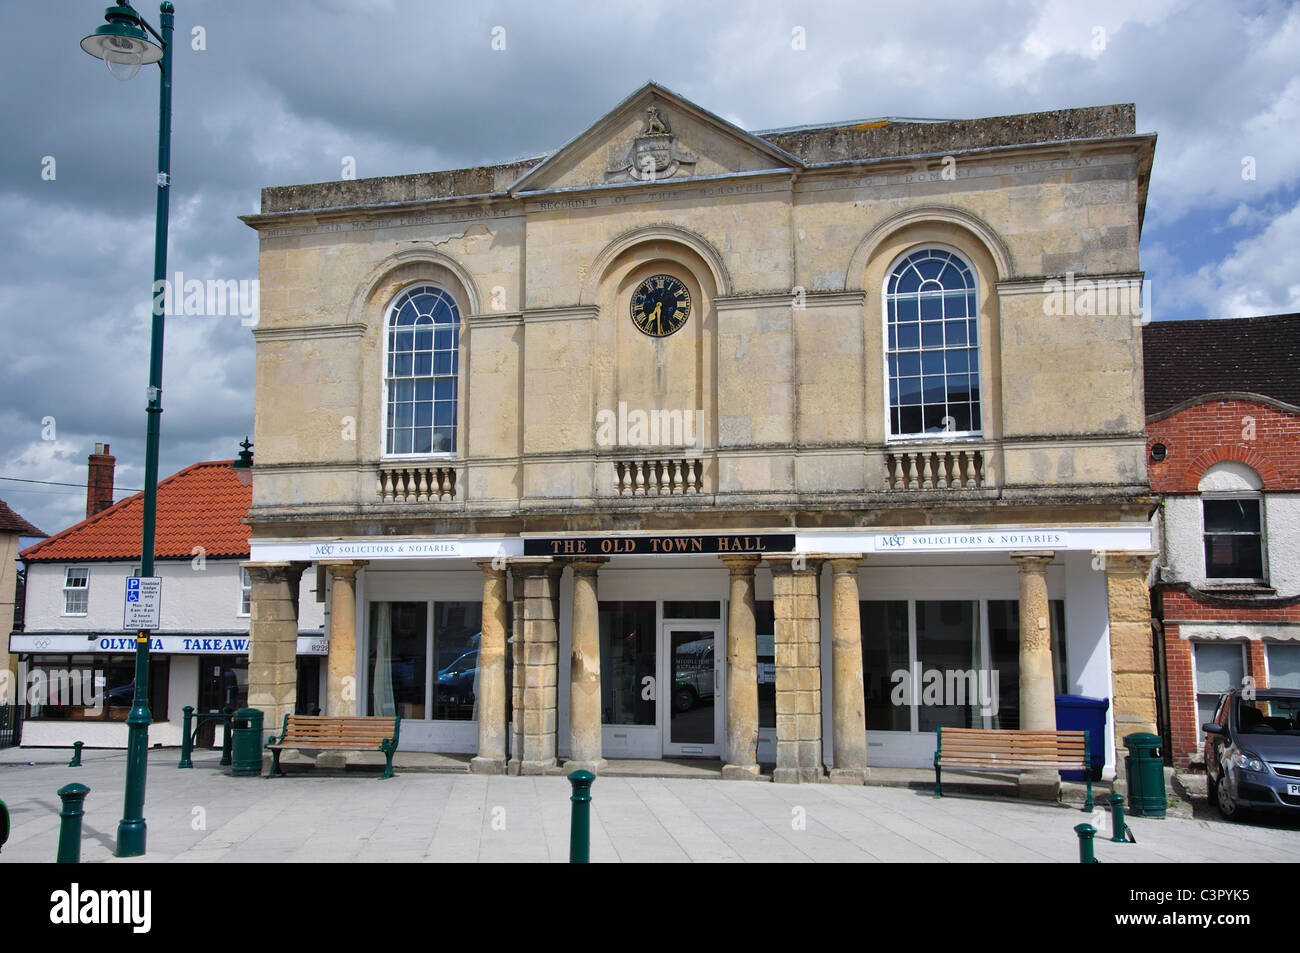 The Old Town Hall, Market Place, Westbury, Wiltshire, England, United Kingdom Stock Photo